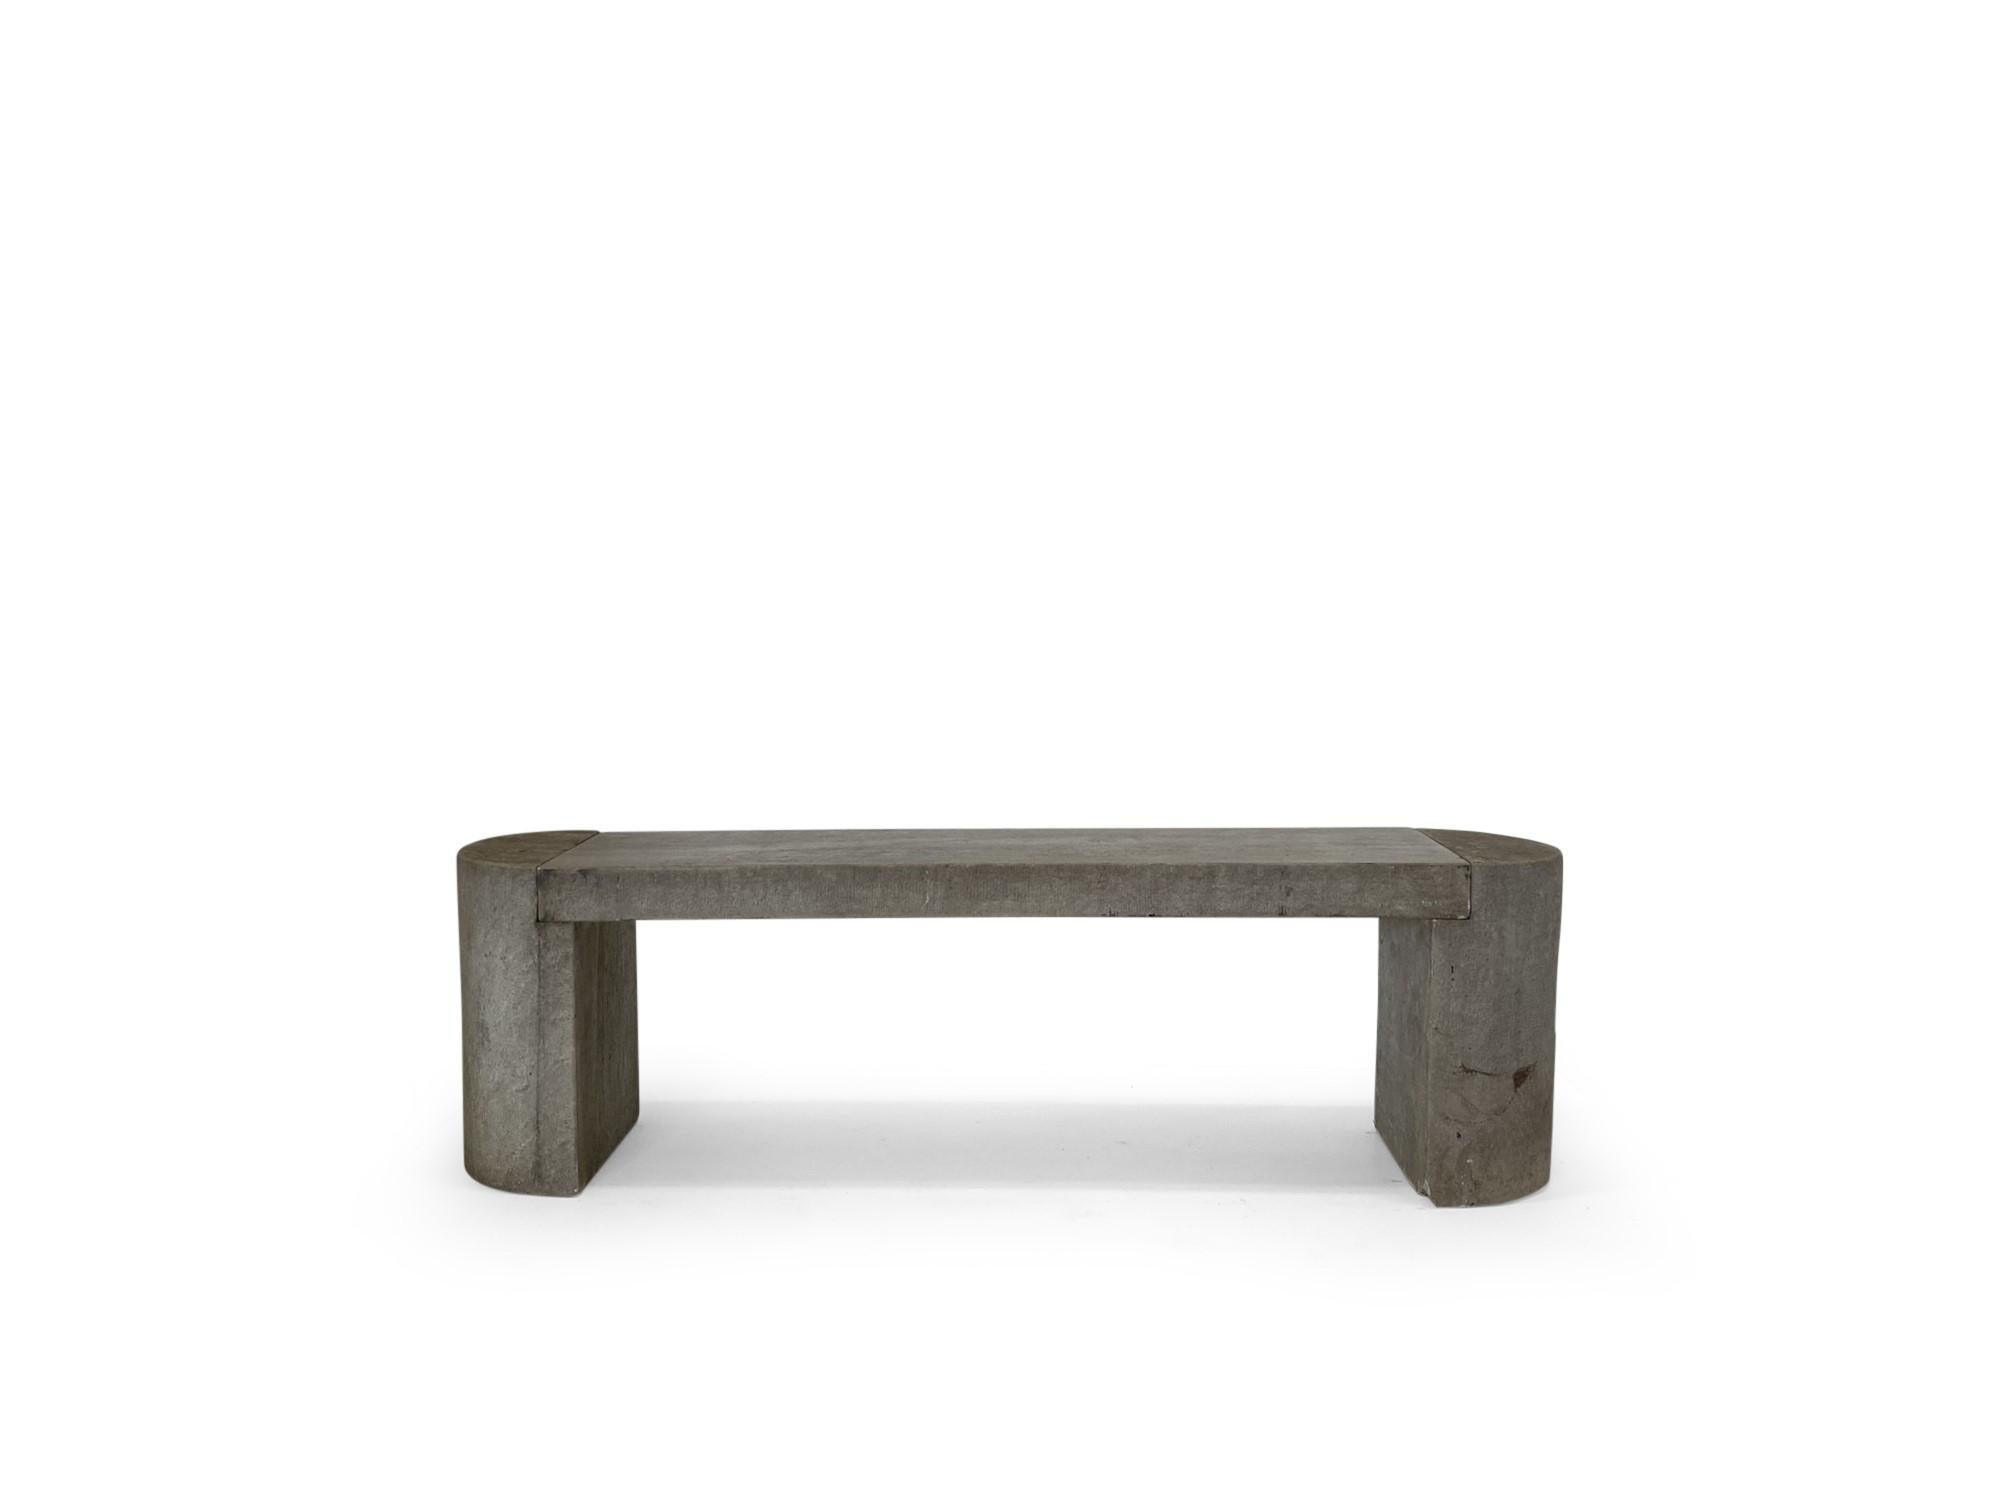 Modernist Polished Stone Concrete Bench Seat with Aged Patina For Sale 9